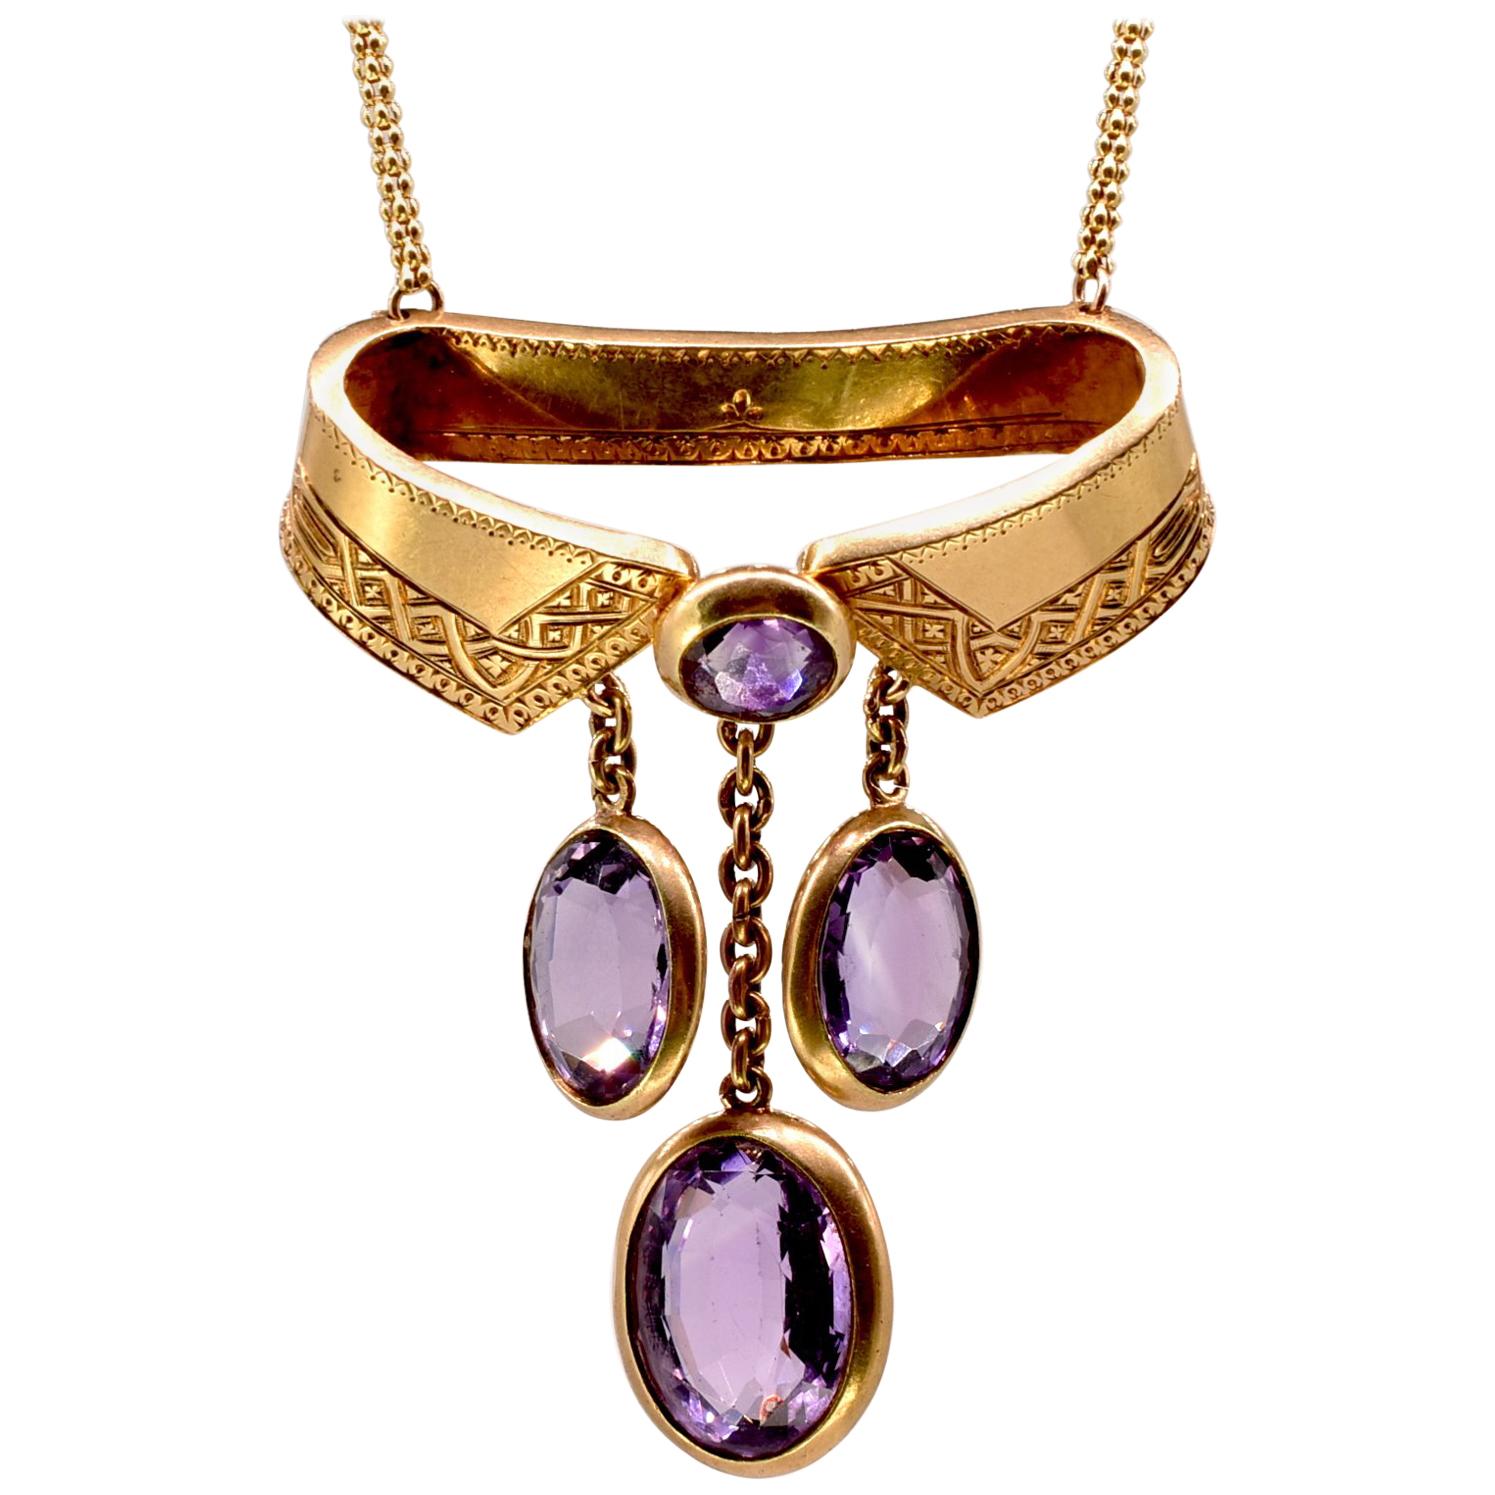 Antique Amethyst Gold Collar Necklace